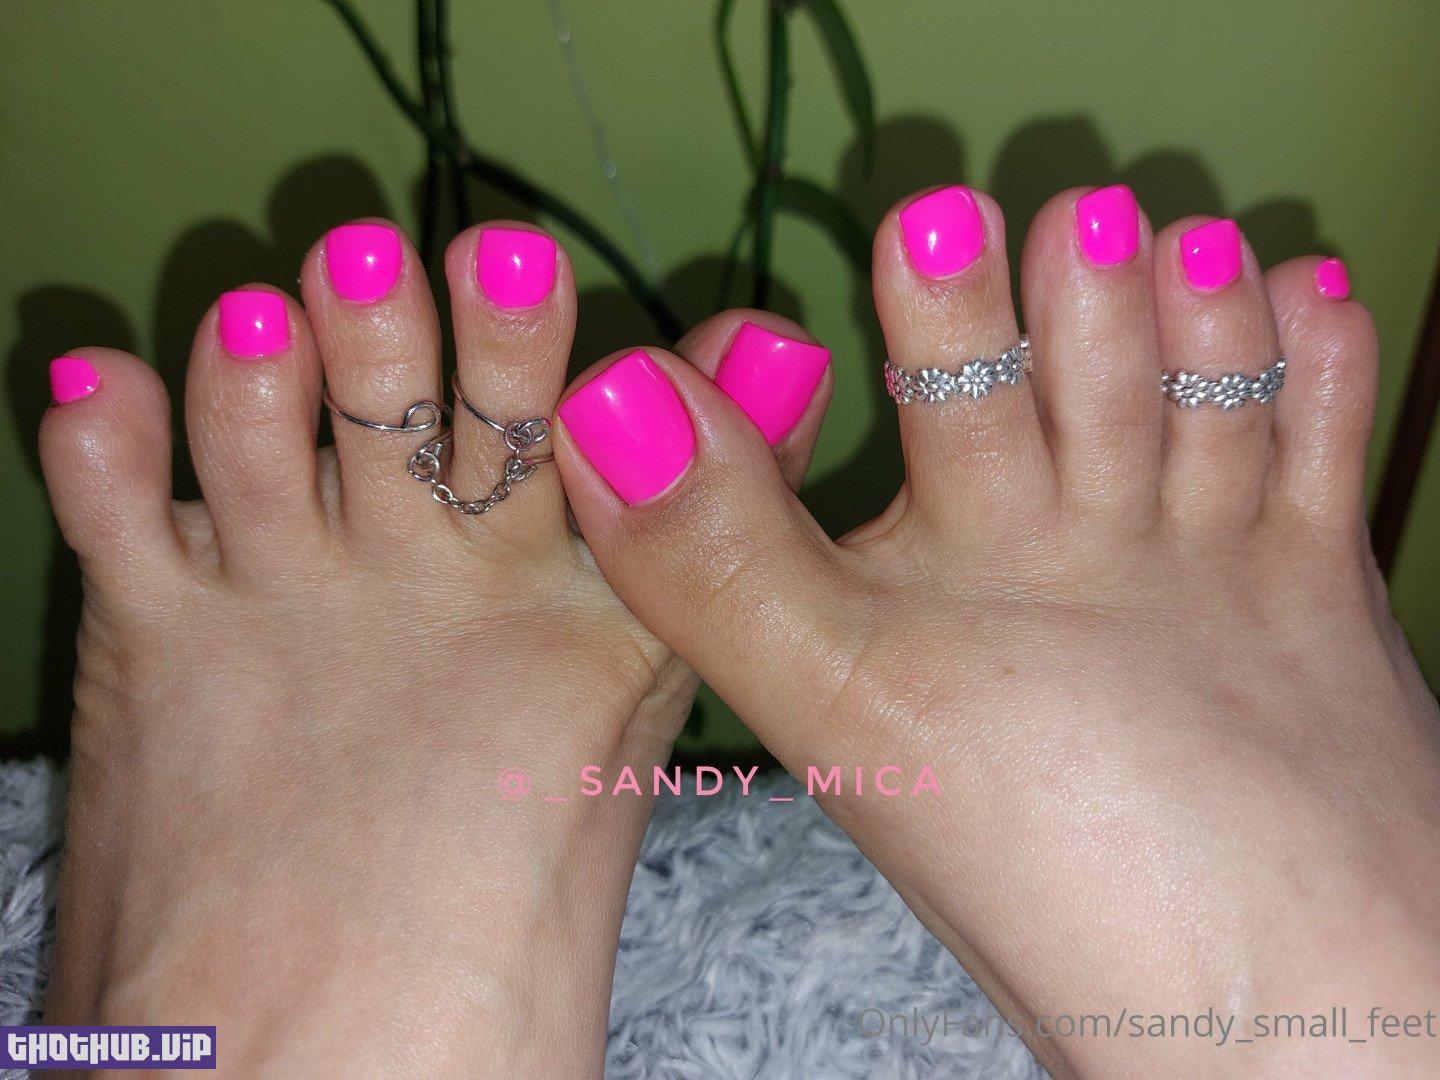 Sandy_small_feet (sandy_small_feet) Onlyfans Leaks (30 images)